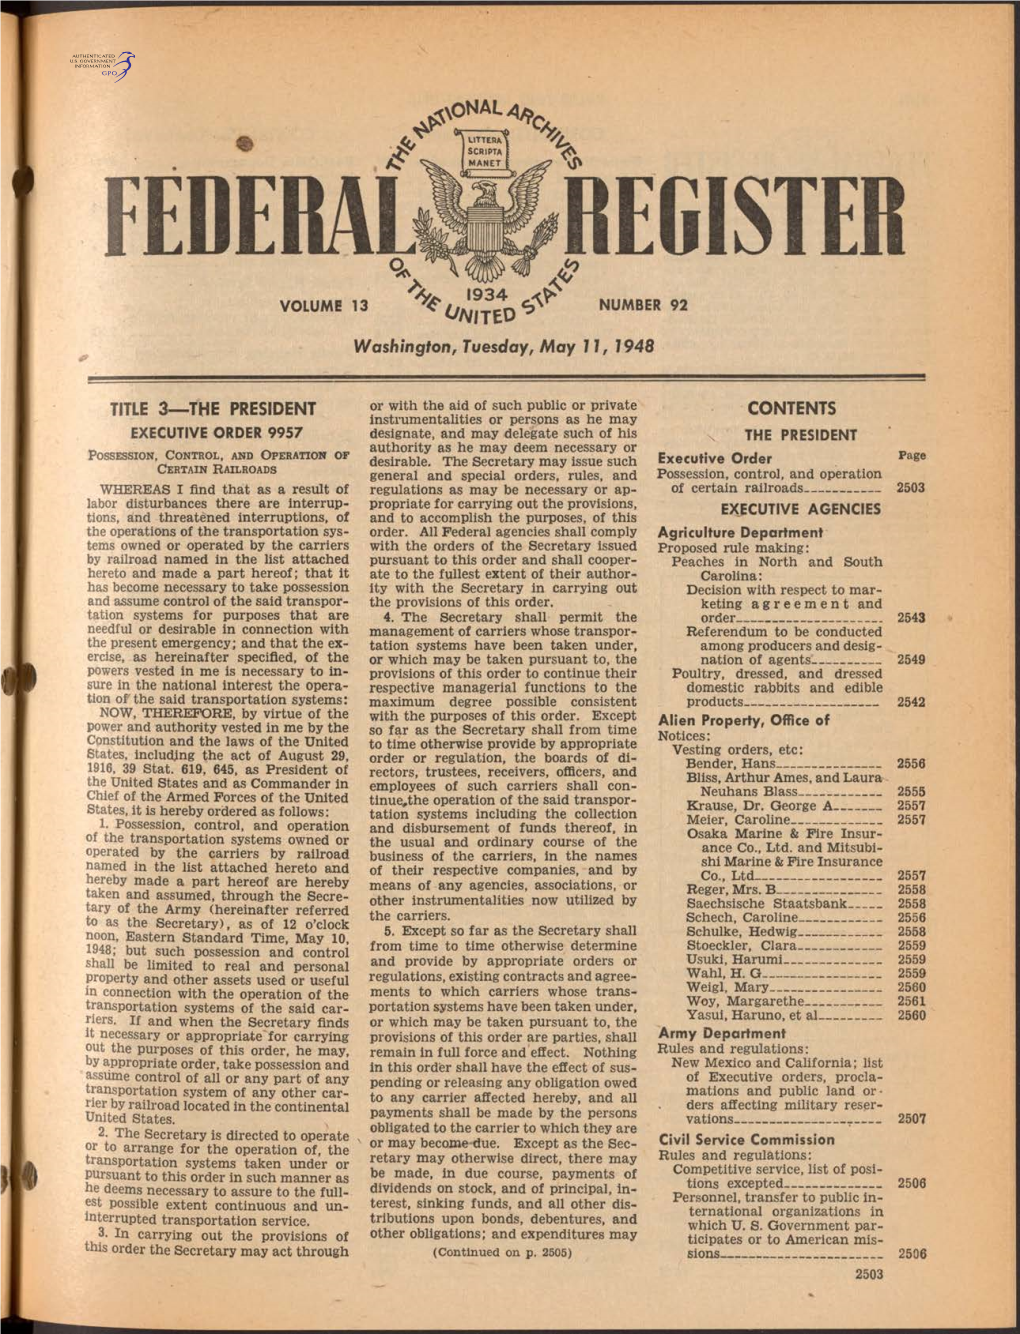 FEDERAL REGISTER 1934 VOLUME 13 ¿¡P NUMBER 92 * United ^ Washington, Tuesday, May 11, 1948